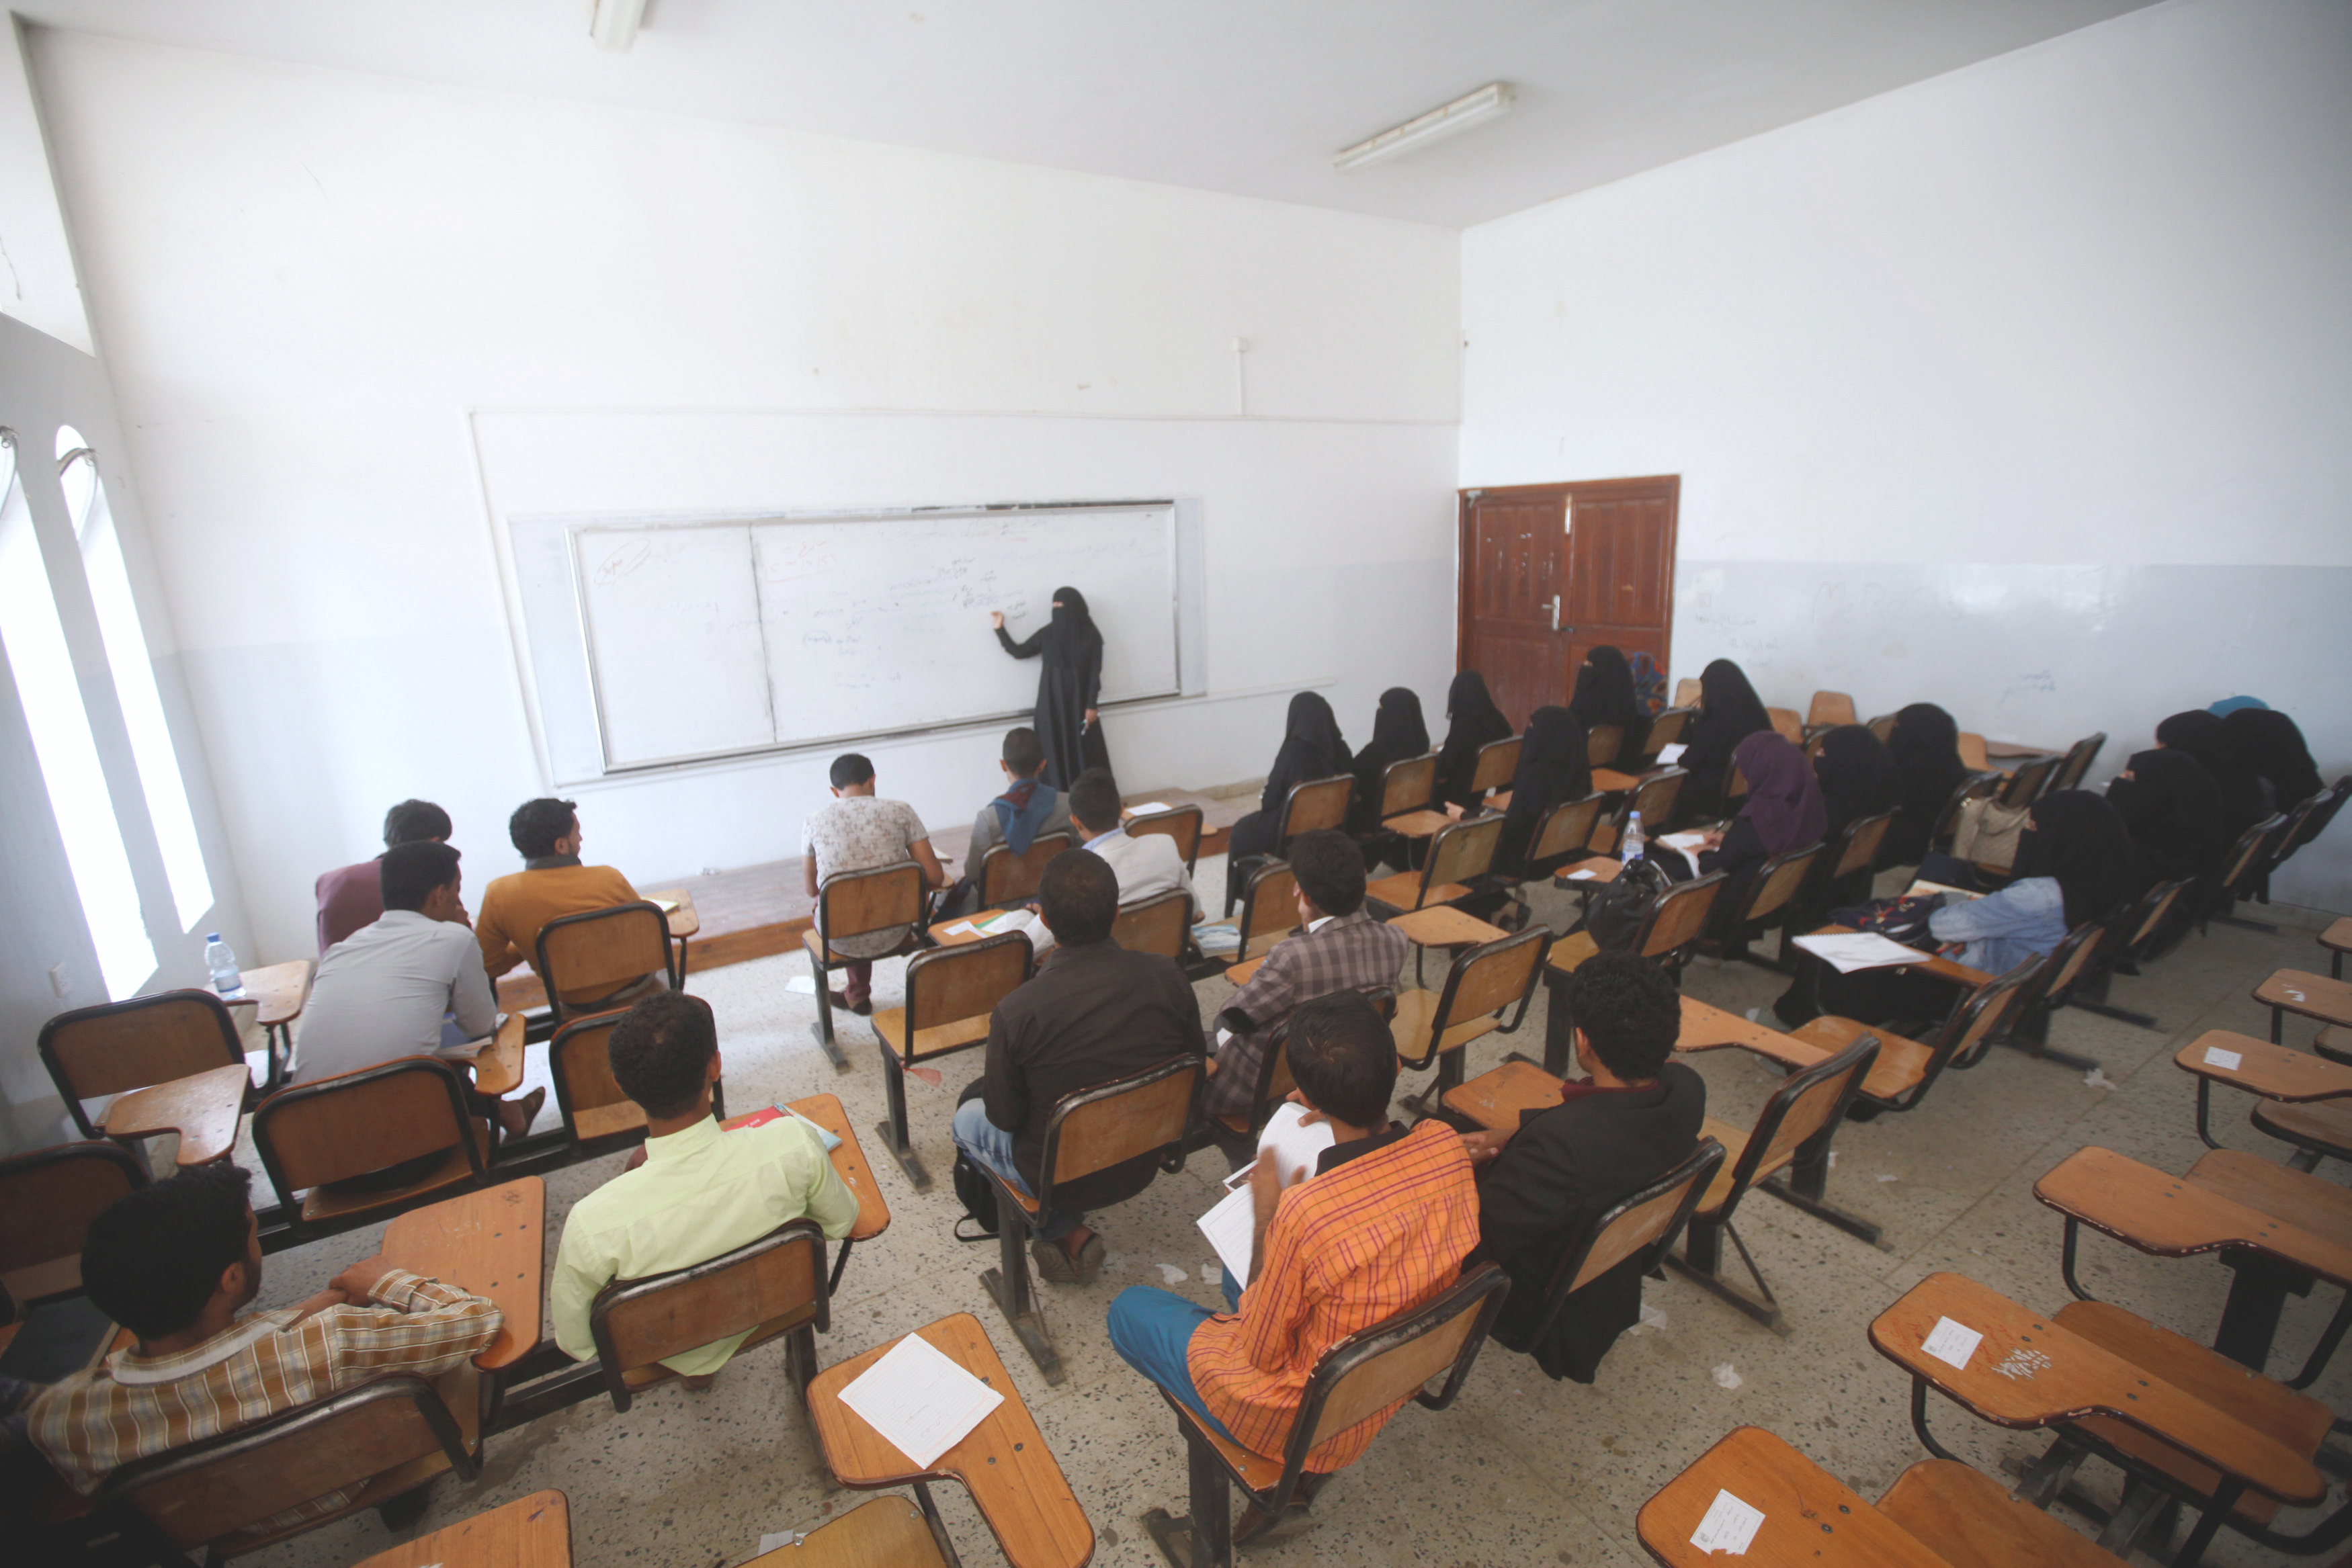 Students listen to a professor during a class at Sanaa University in Sanaa